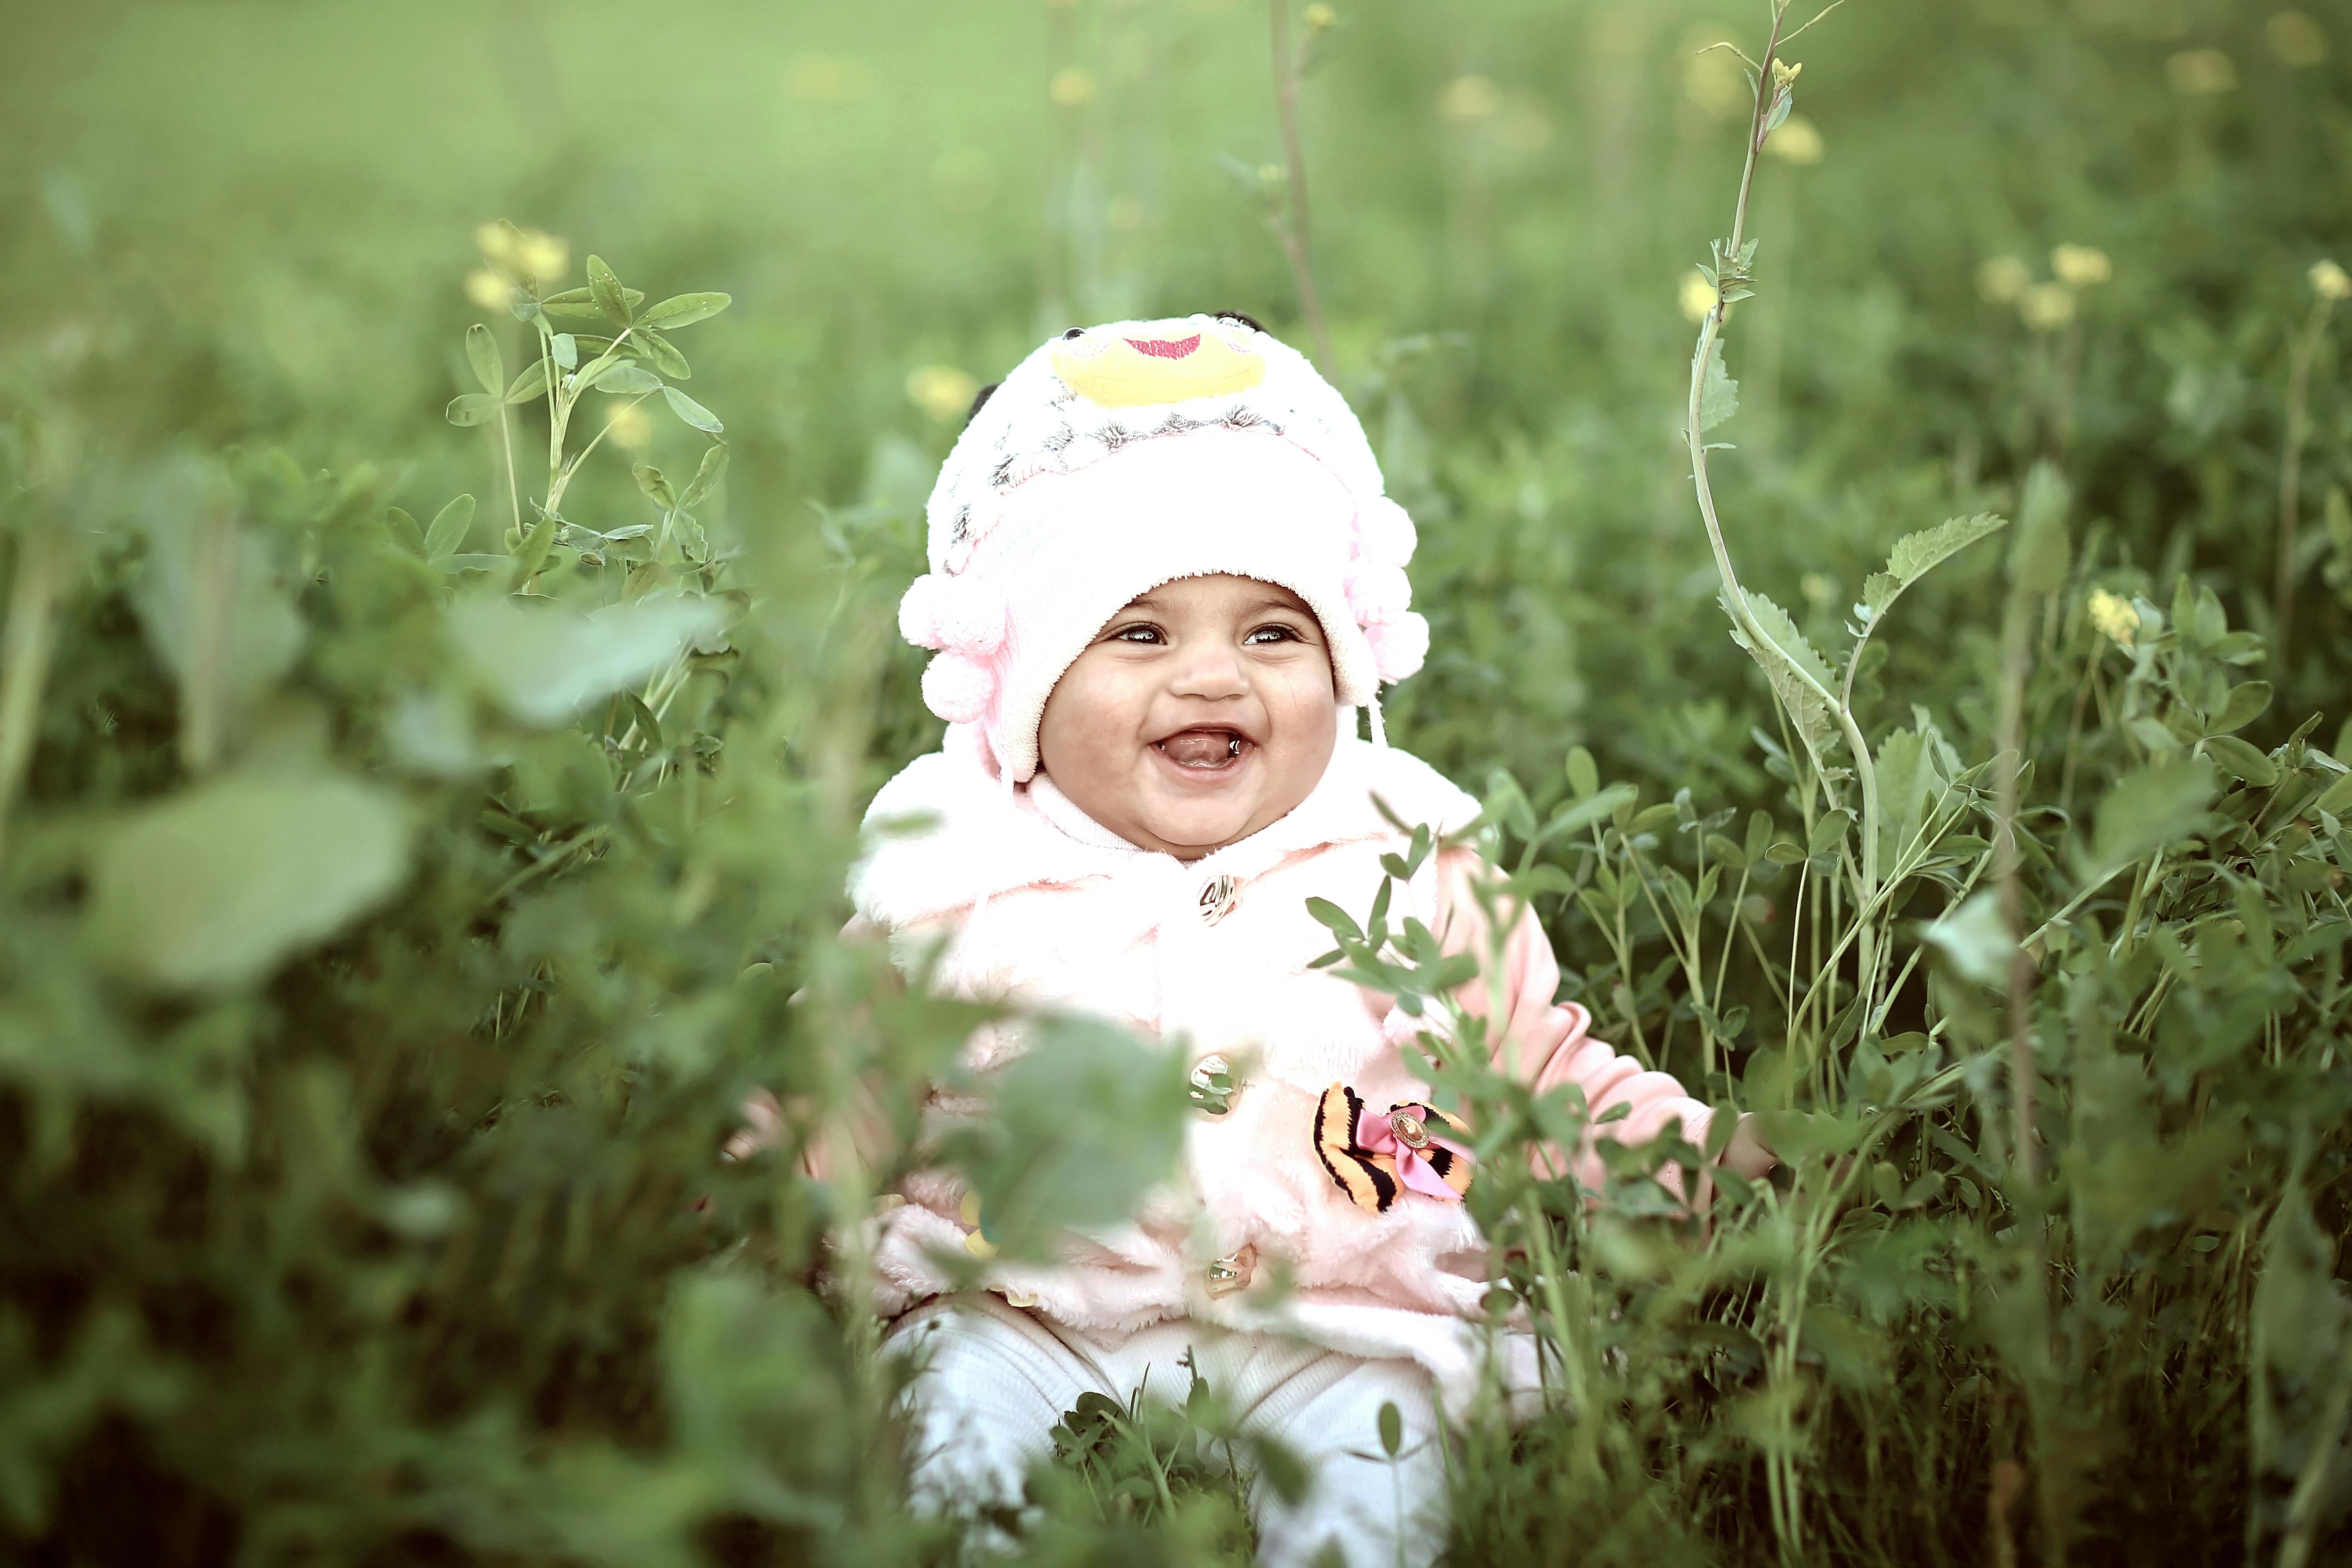 390268 Adorable Cute Baby Girl 4k - Rare Gallery HD Wallpapers